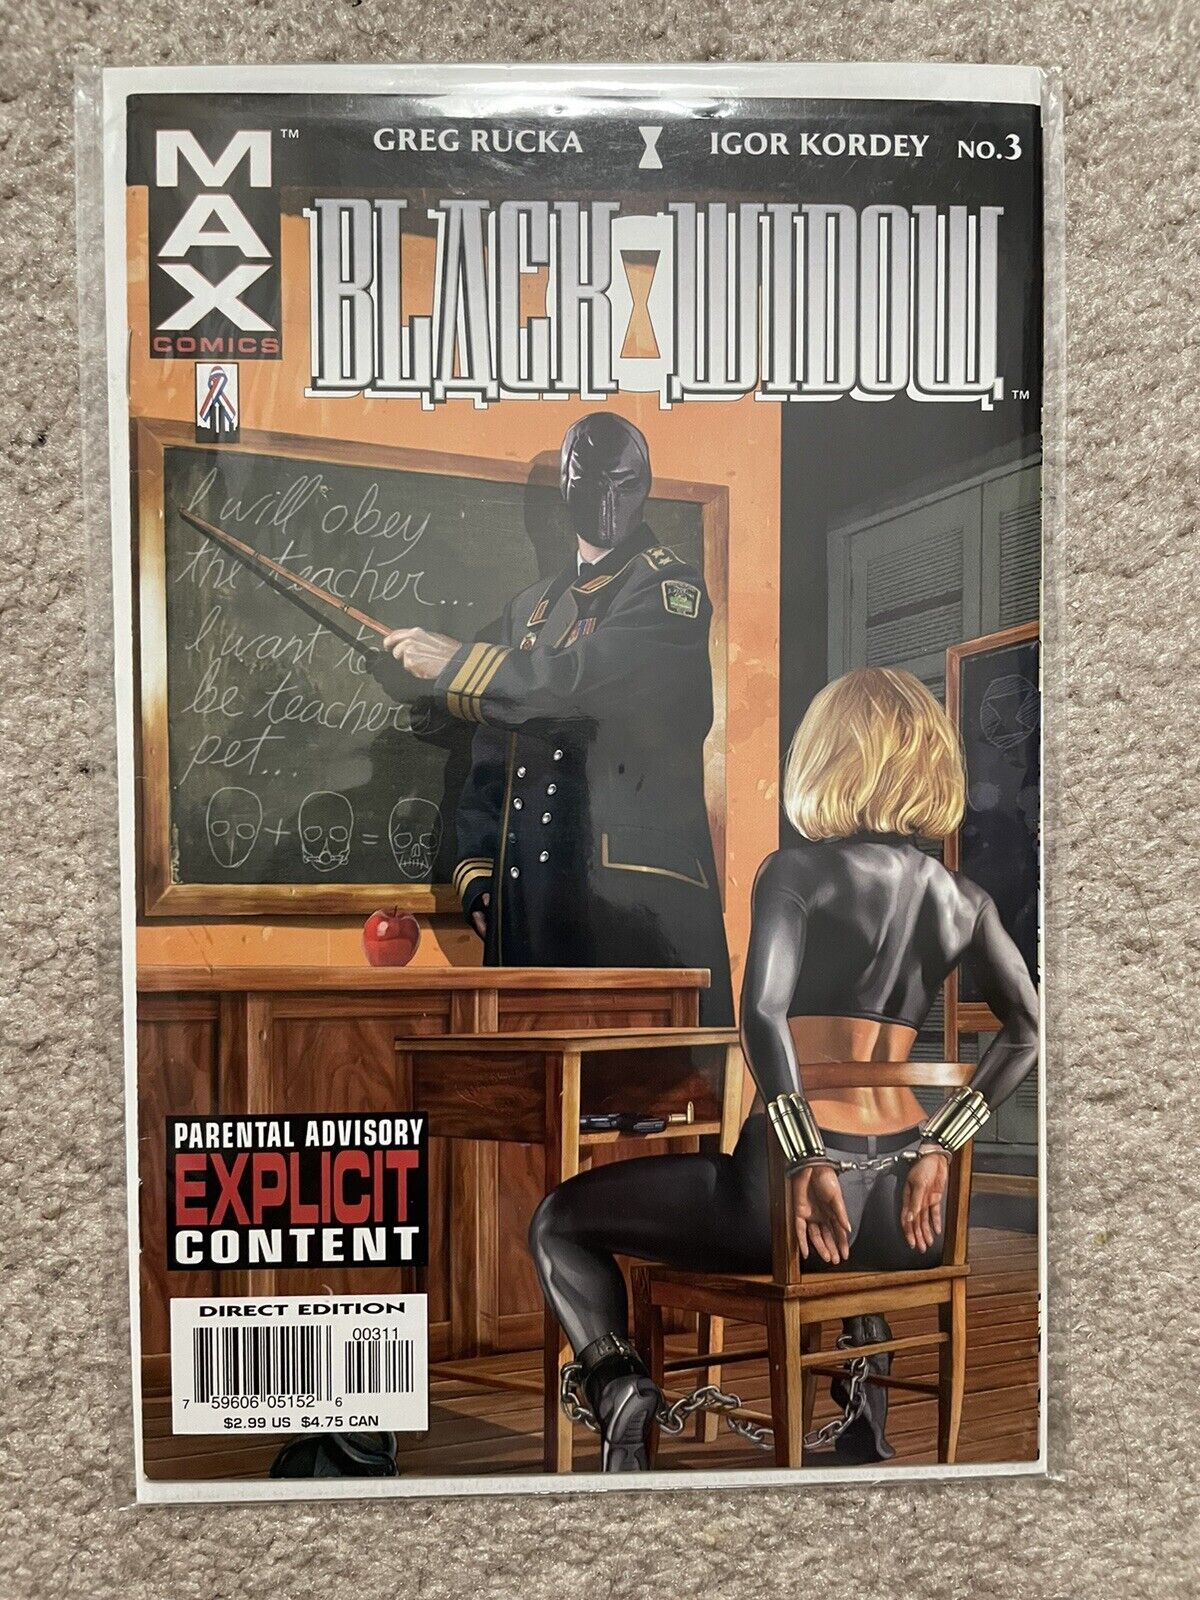 Black Widow: Pale Little Spider #3 Marvel Max Comic 2002 1st appearance Chechnya